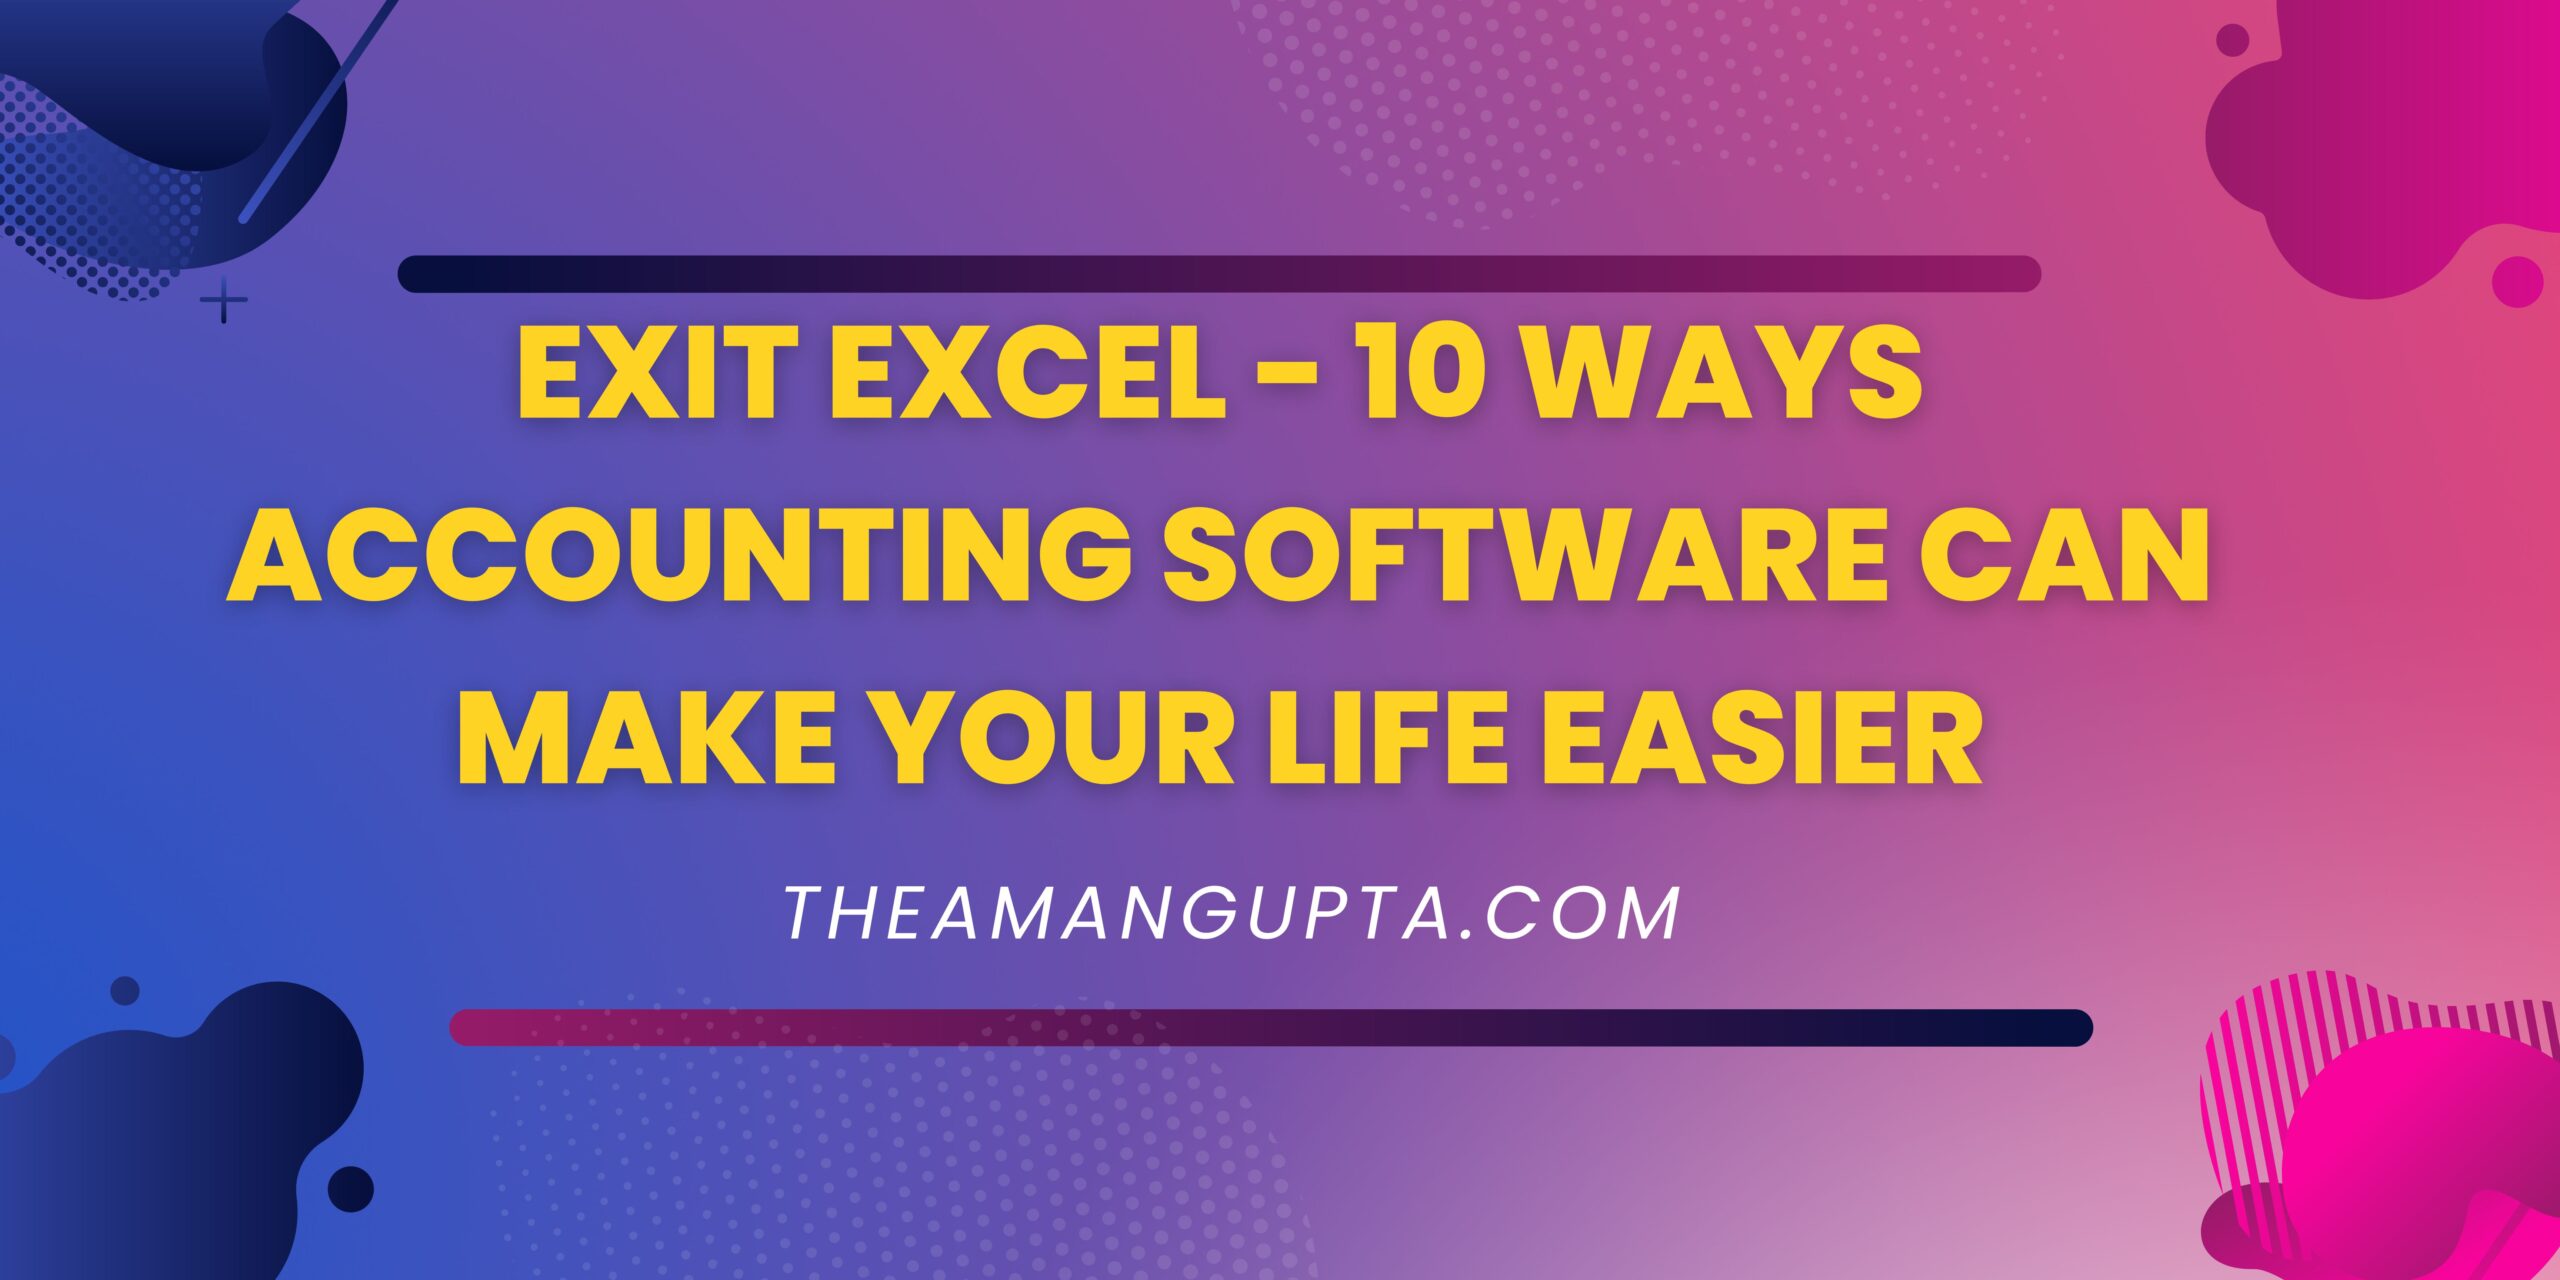 10 Ways Accounting Software Can Make Your Life Easier|Exit Excel|Theamangupta|Theamangupta